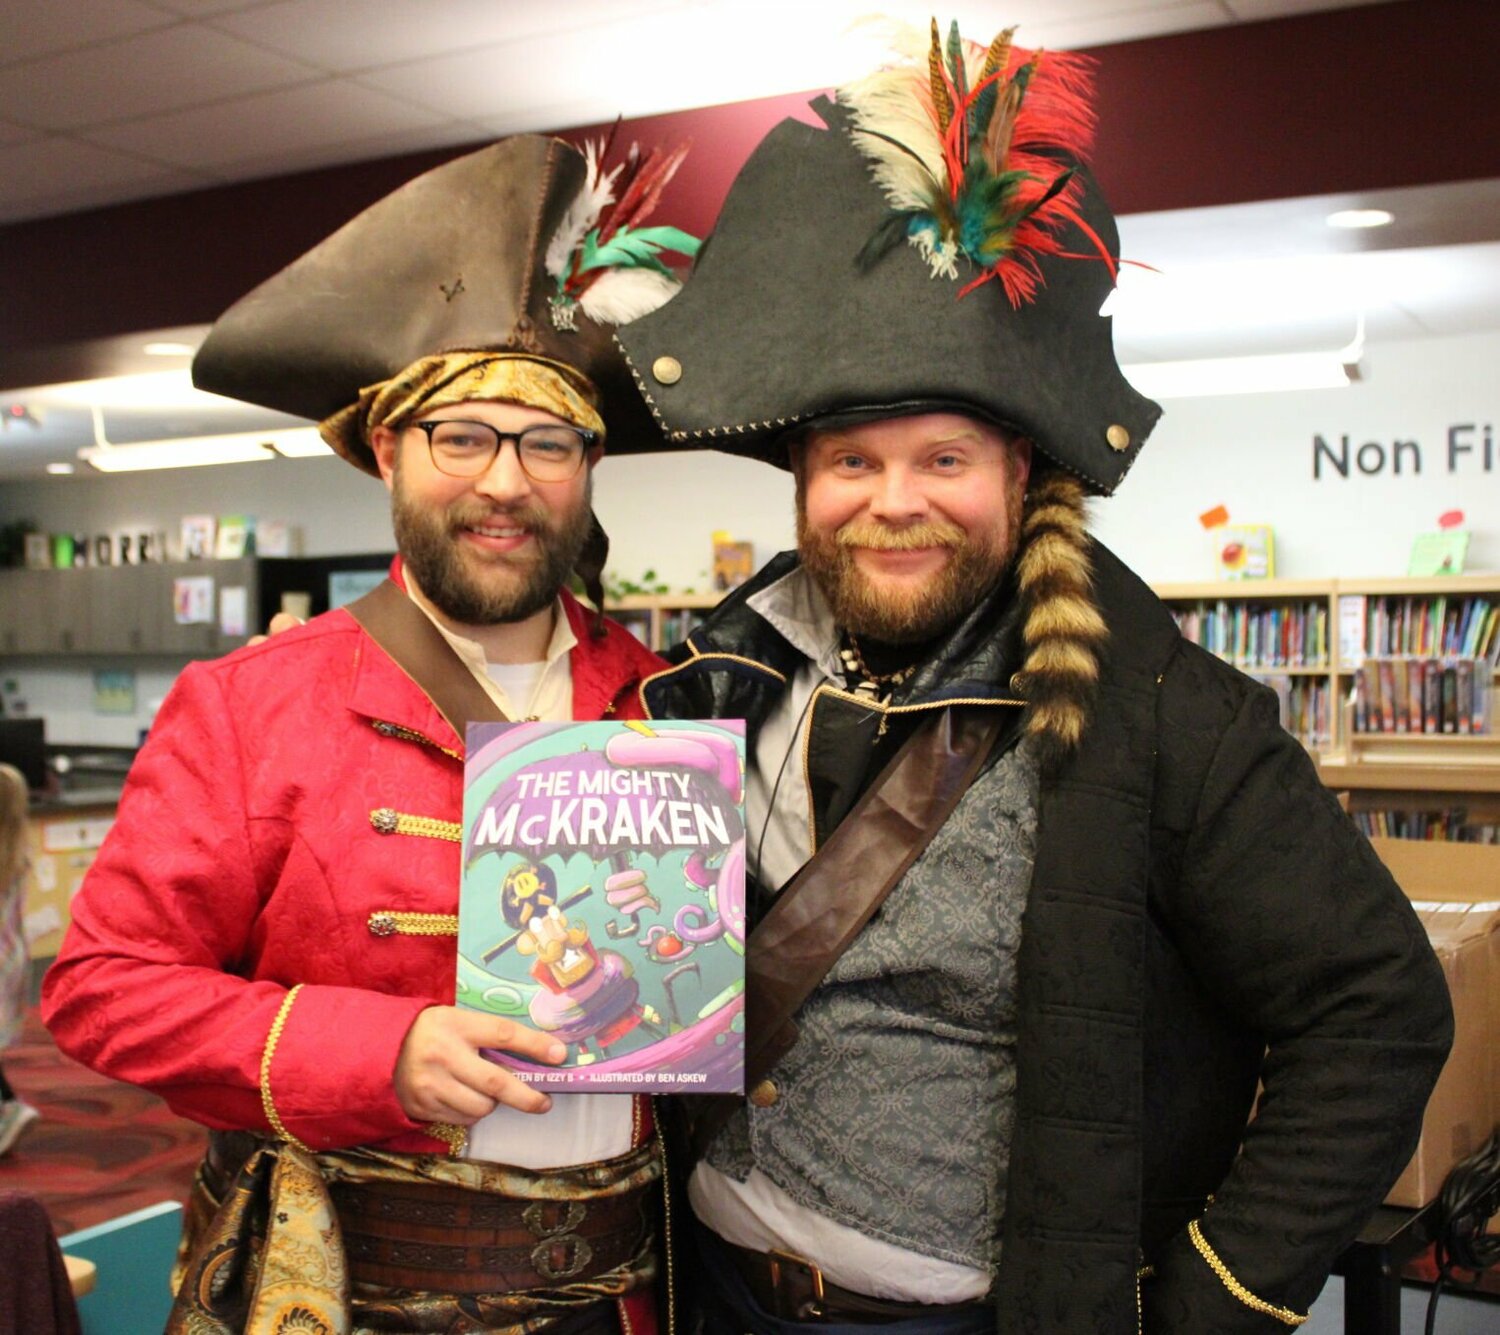 Illustrator Ben Askew (Left) and Author Isaiah "Izzy B" (Right) were in the Strafford Elementry Libary, signing copies of their latest book, "The Mighty McKracken."